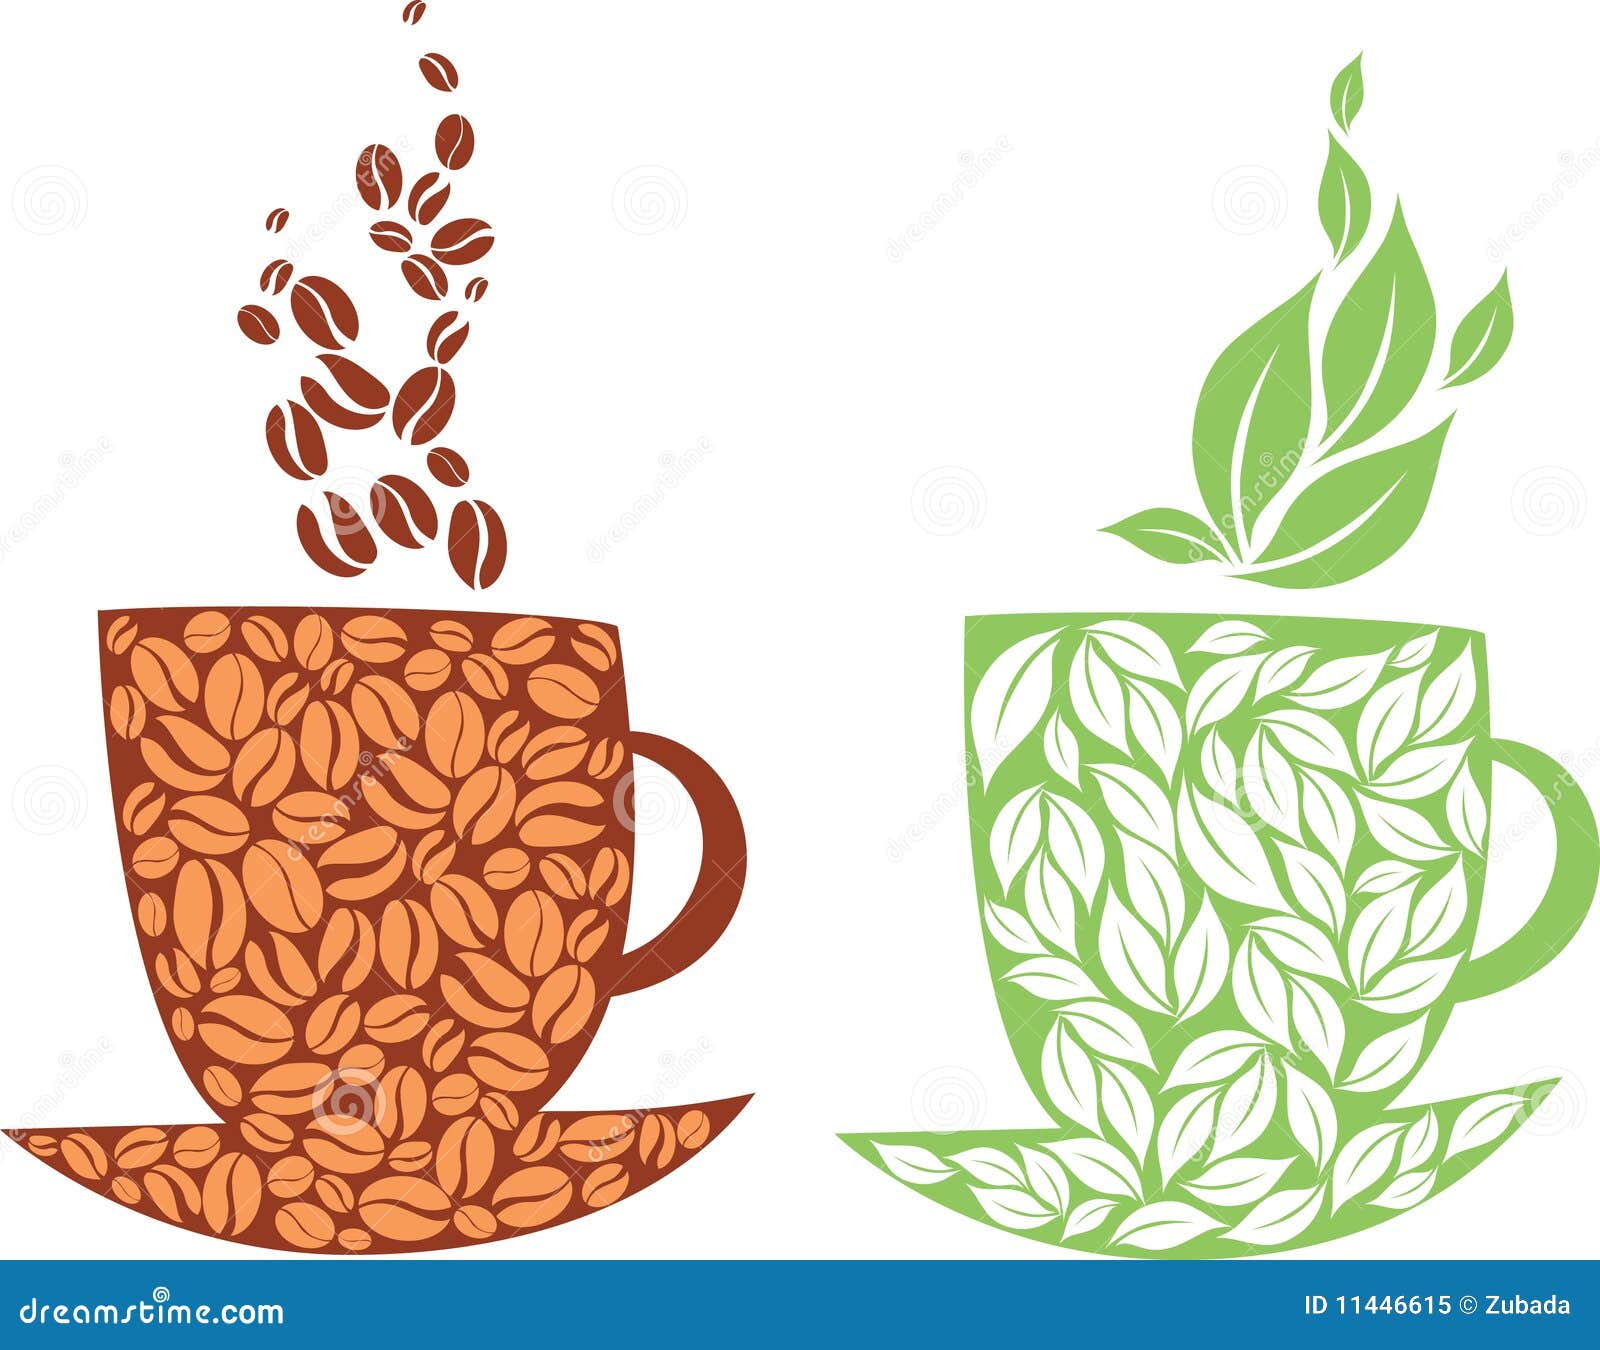 Tea or coffee stock vector. Illustration of steam, picture ...